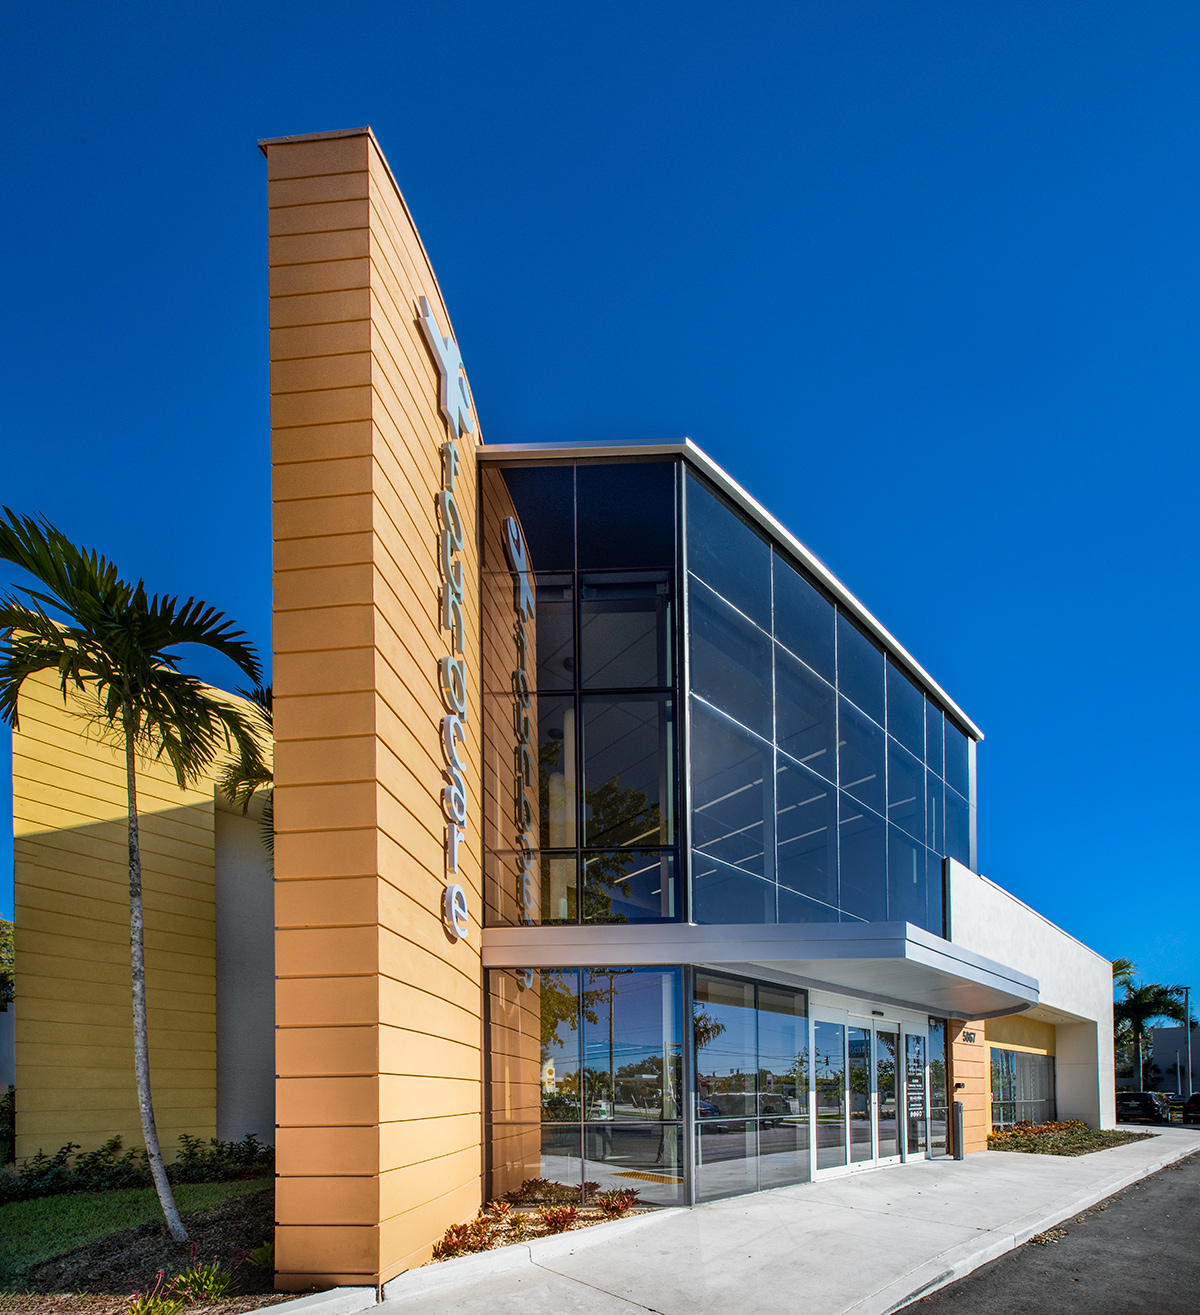 Architectural entrance view of the Foundcare clinic in  West Palm Beach, FL.